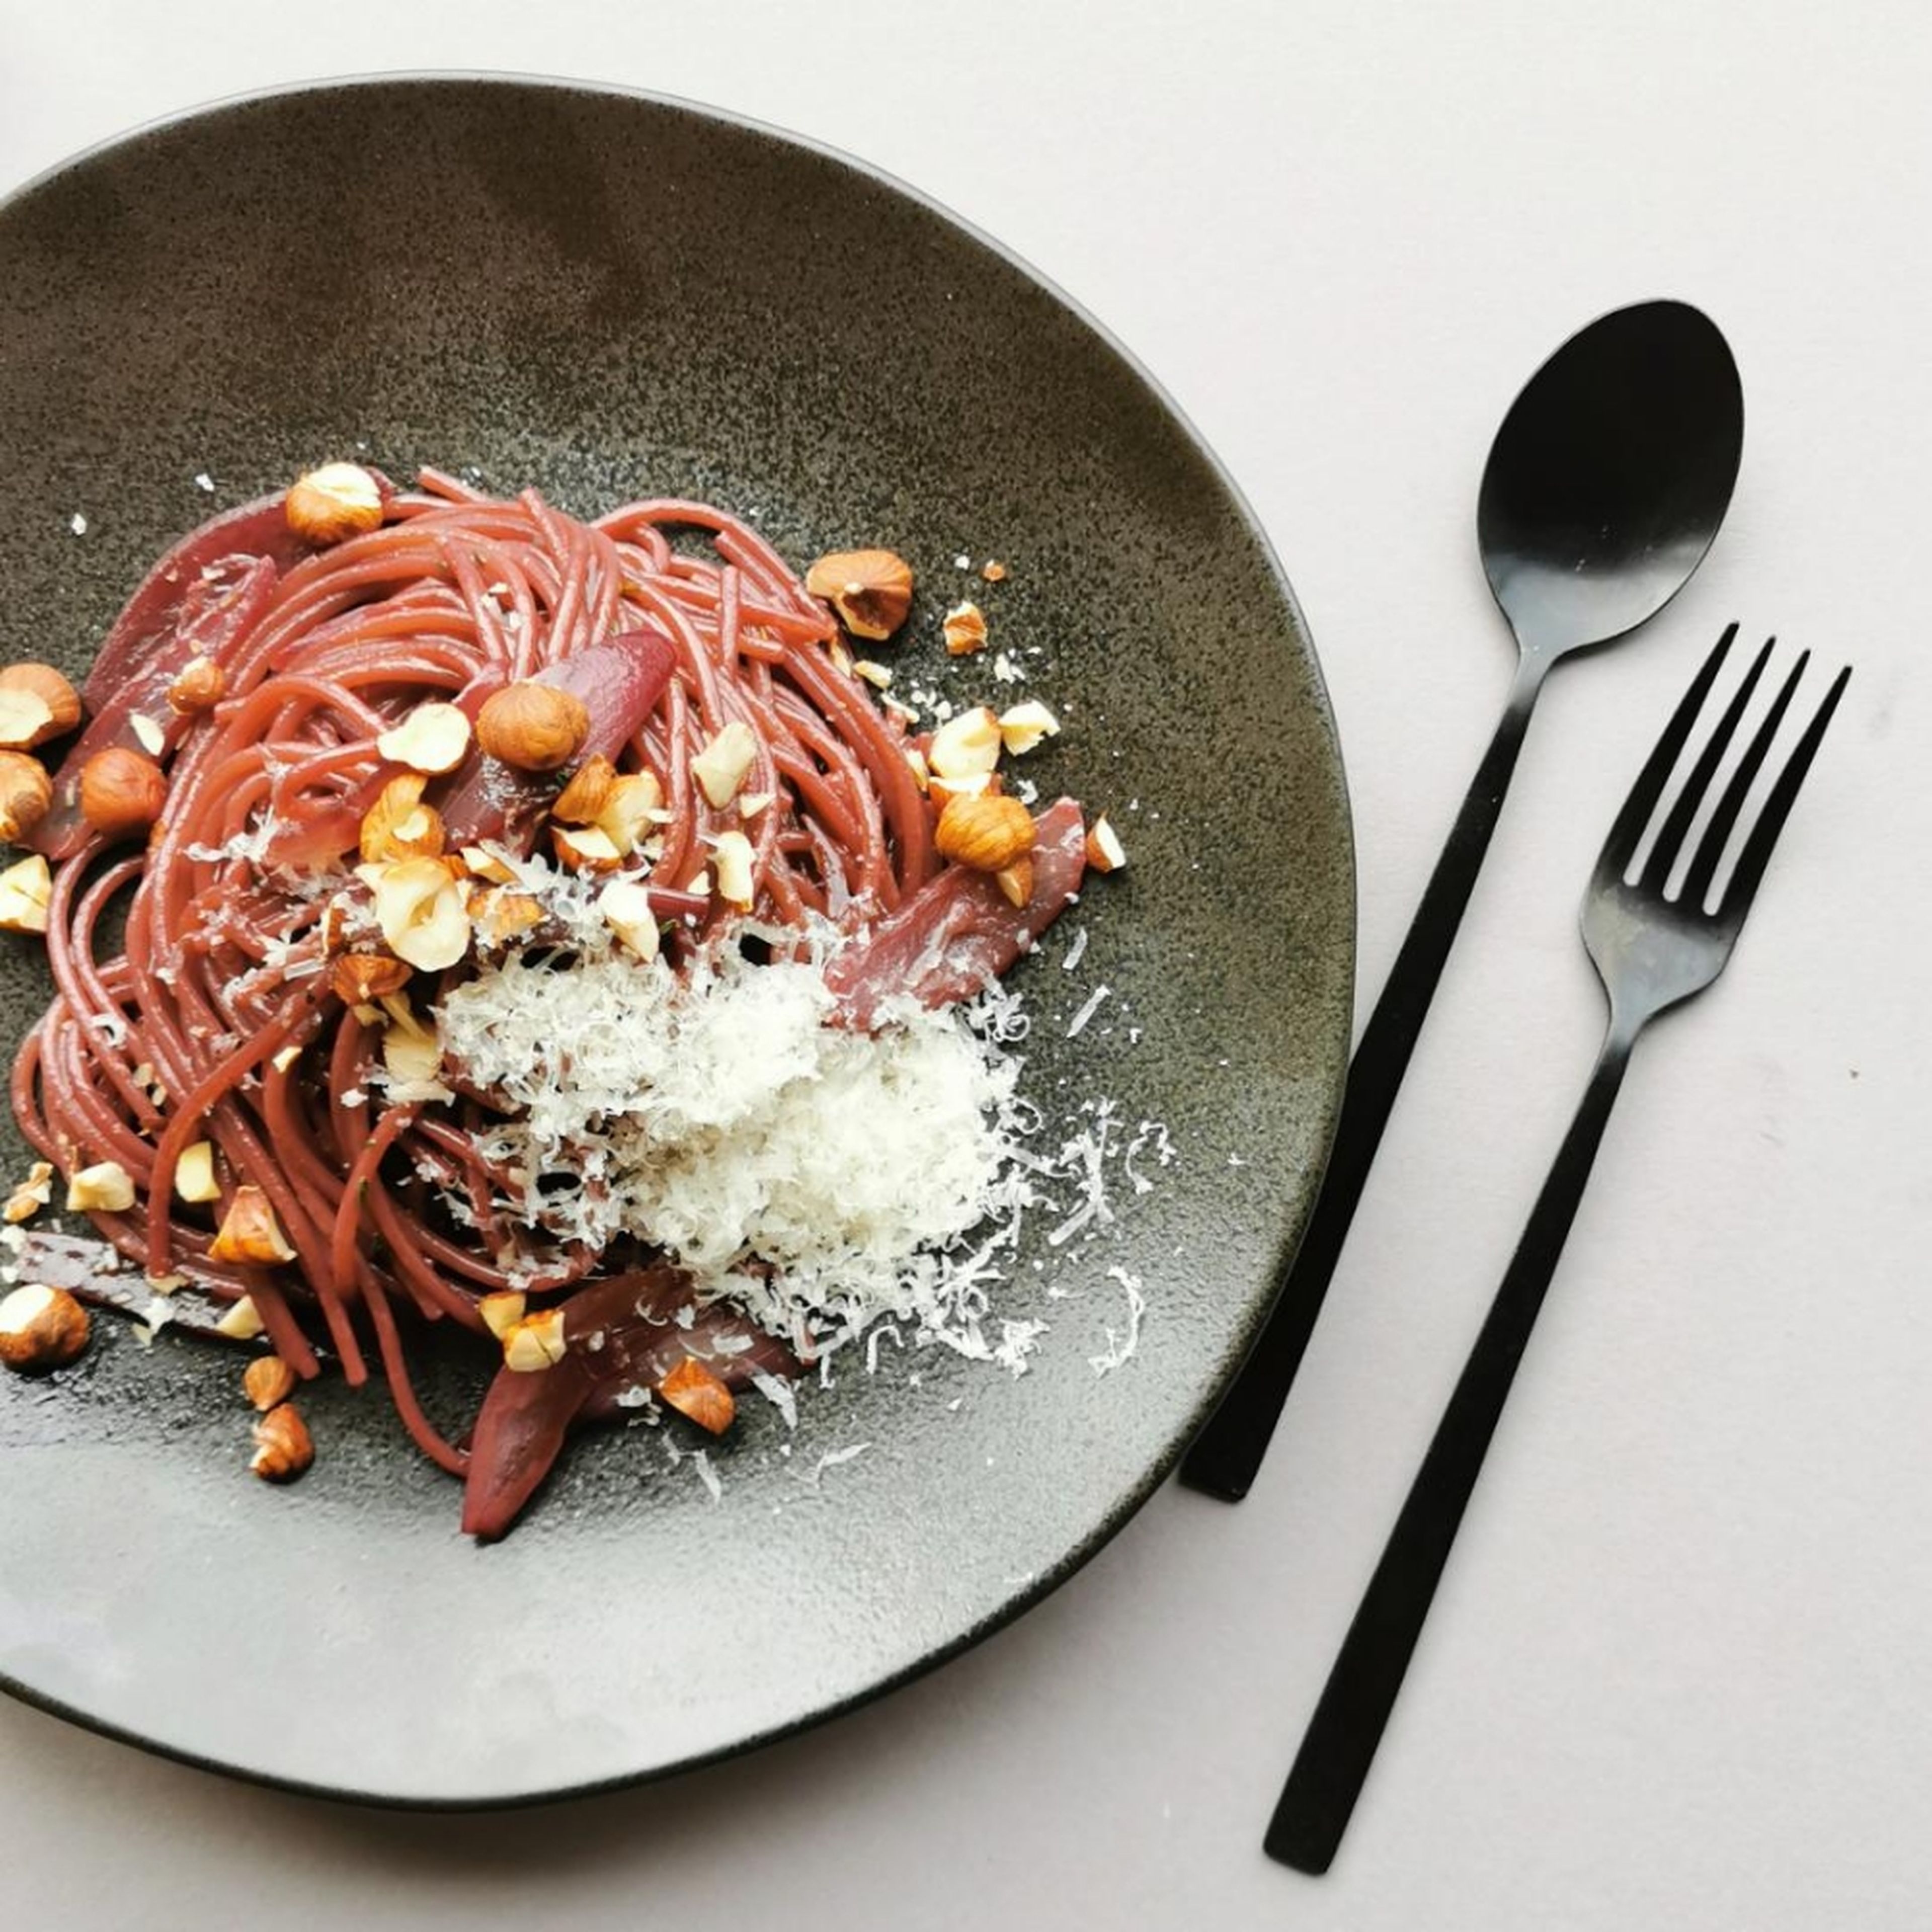 Assemble the pasta on a plate and serve with freshly grated Parmesan cheese and hazelnuts. Bon appétit!